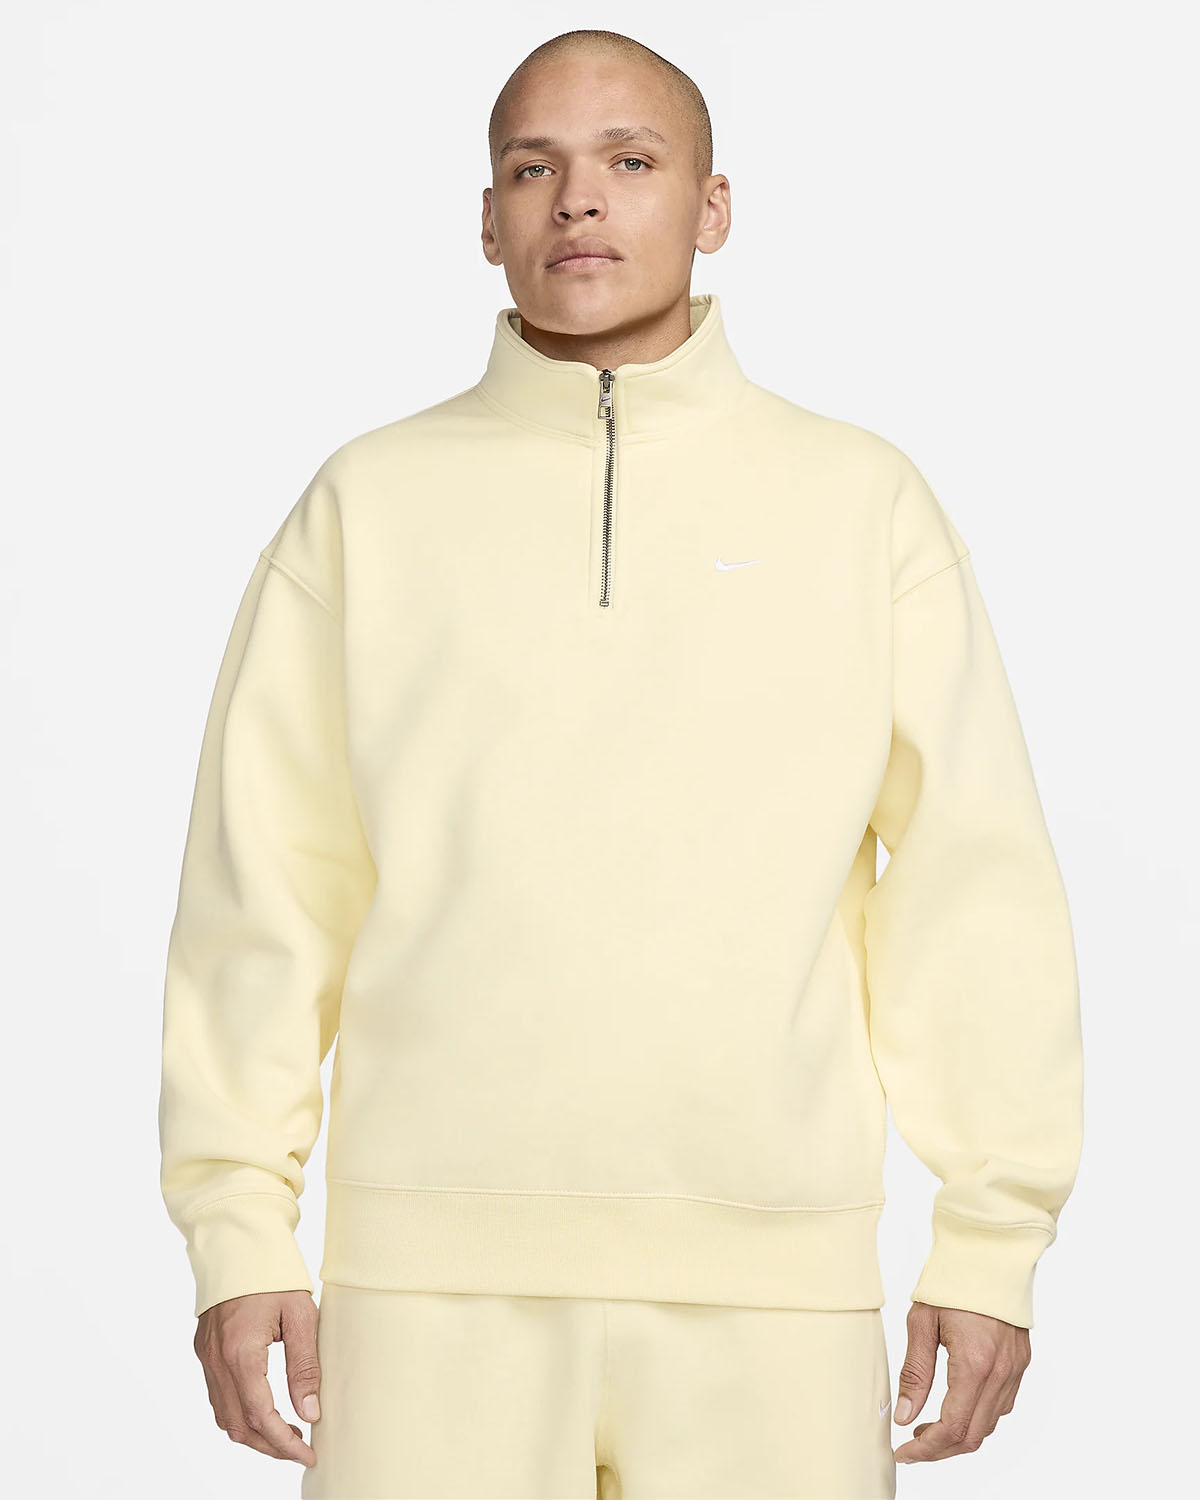 Nike Sportswear Alabaster Shirts Clothing Sneakers Outfits